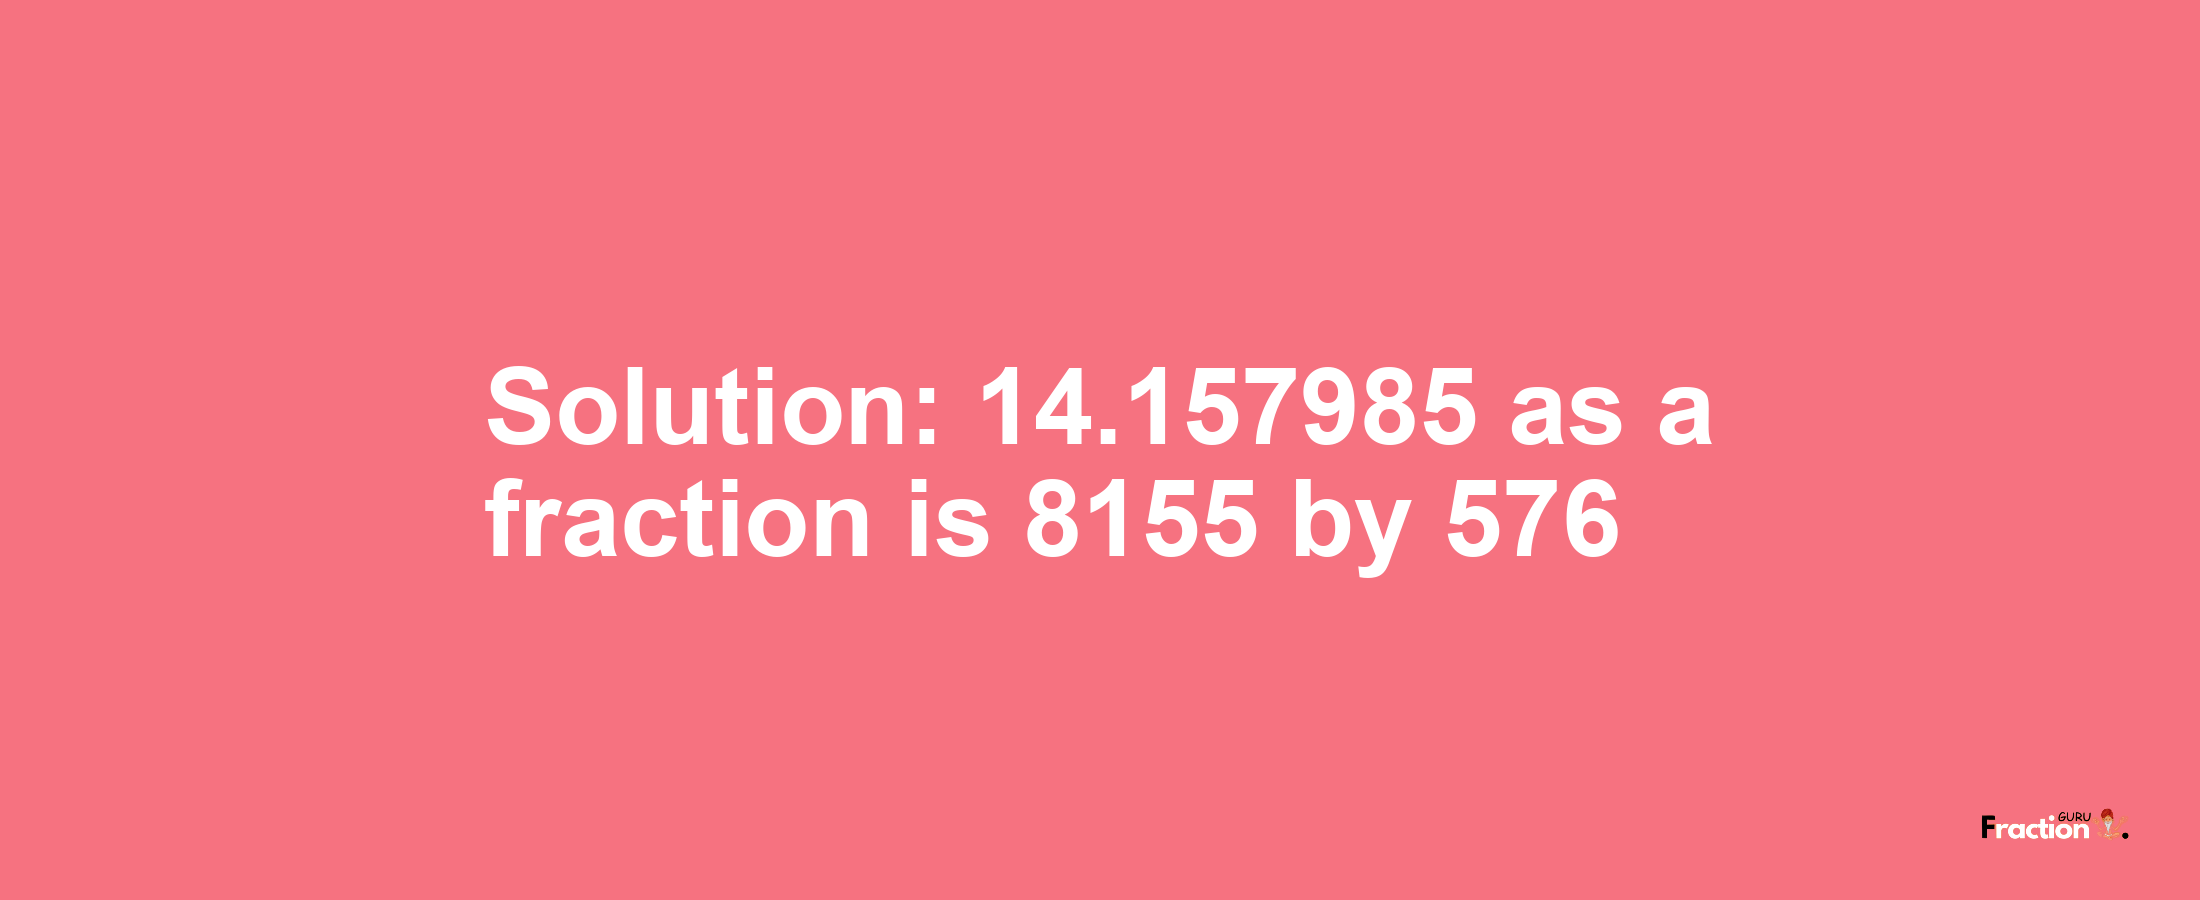 Solution:14.157985 as a fraction is 8155/576